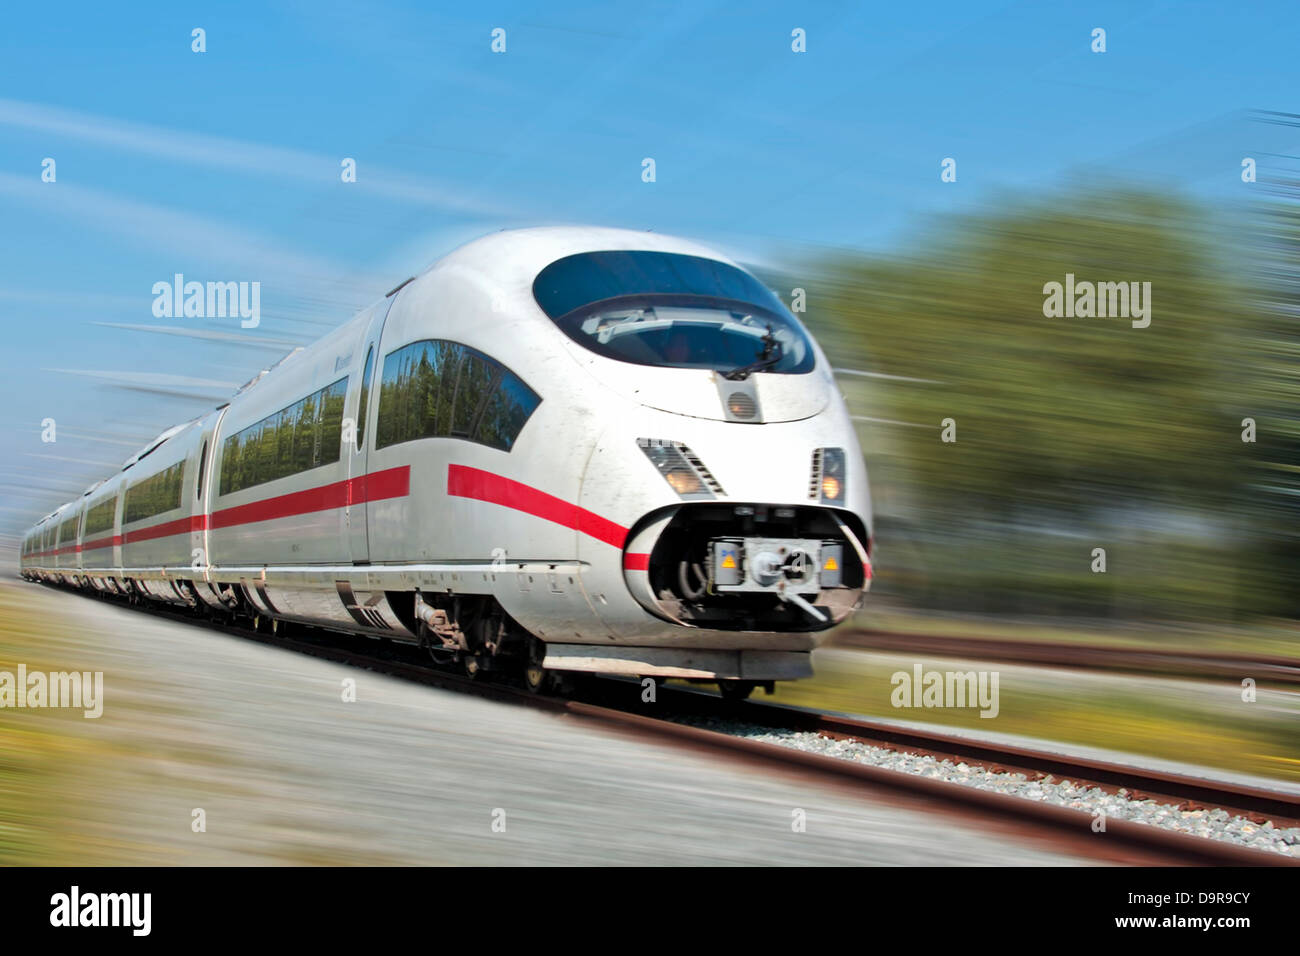 High speed train in the countryside from the Netherlands Stock Photo